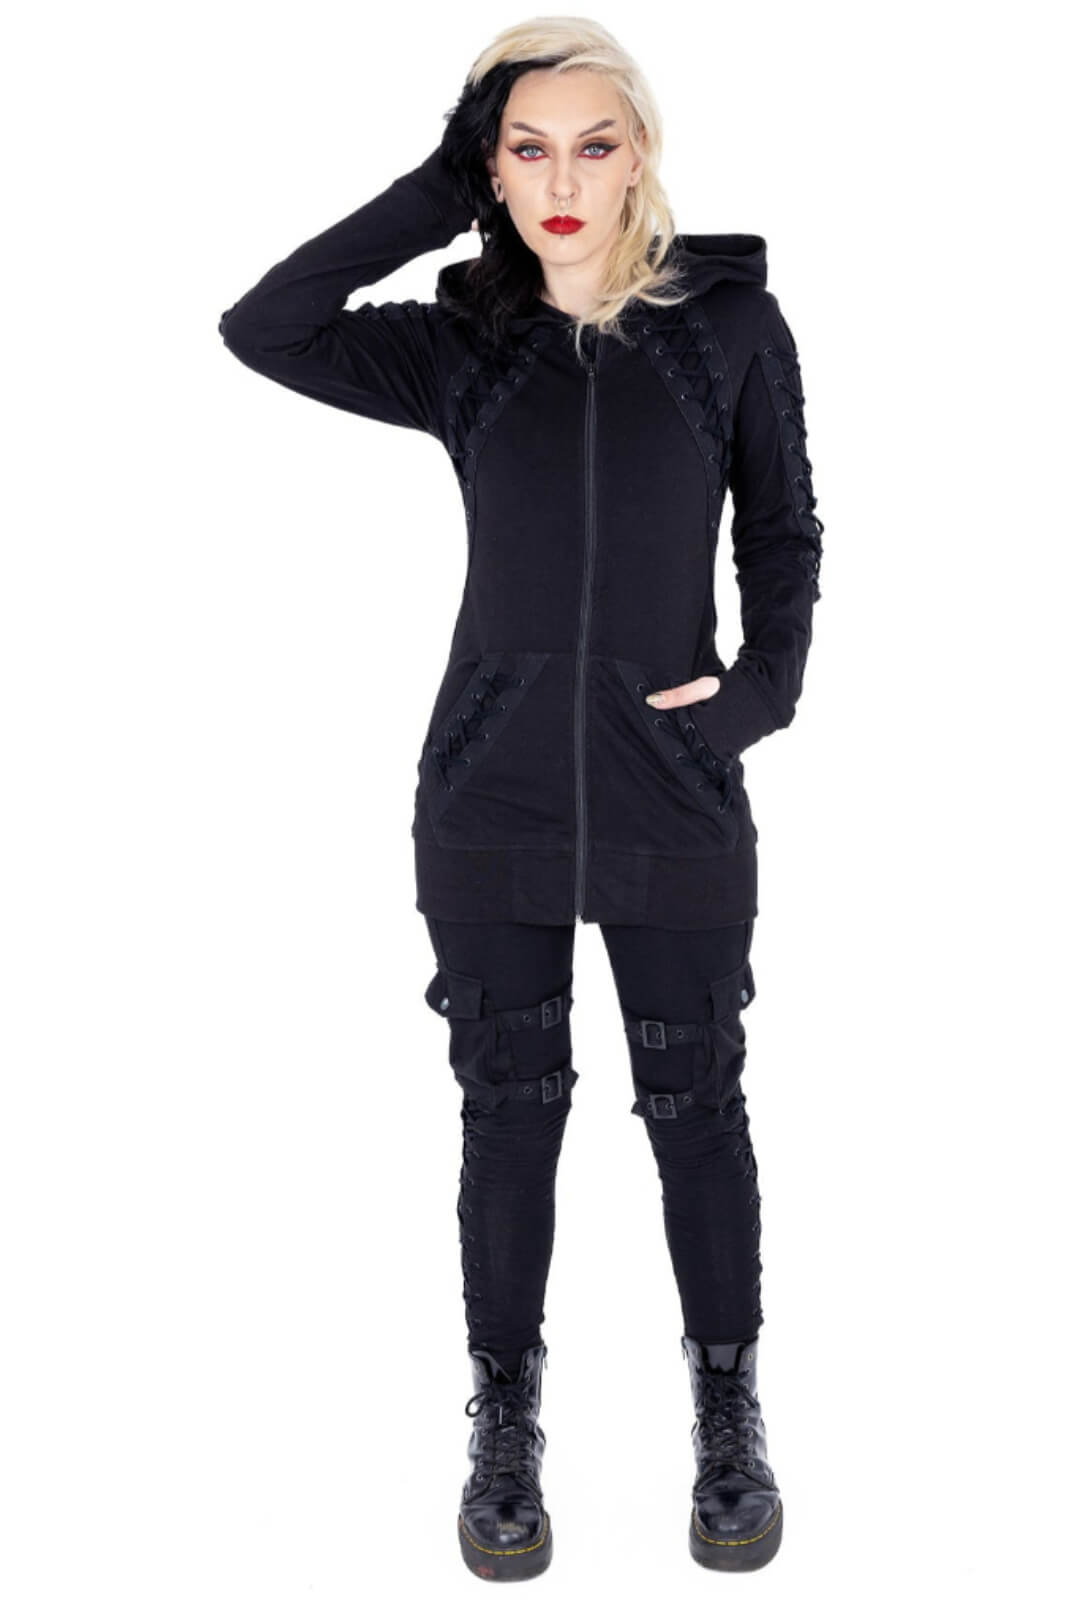 Poizen Industries Diana Hood Full Zip Lace-Up Gothic Jumper